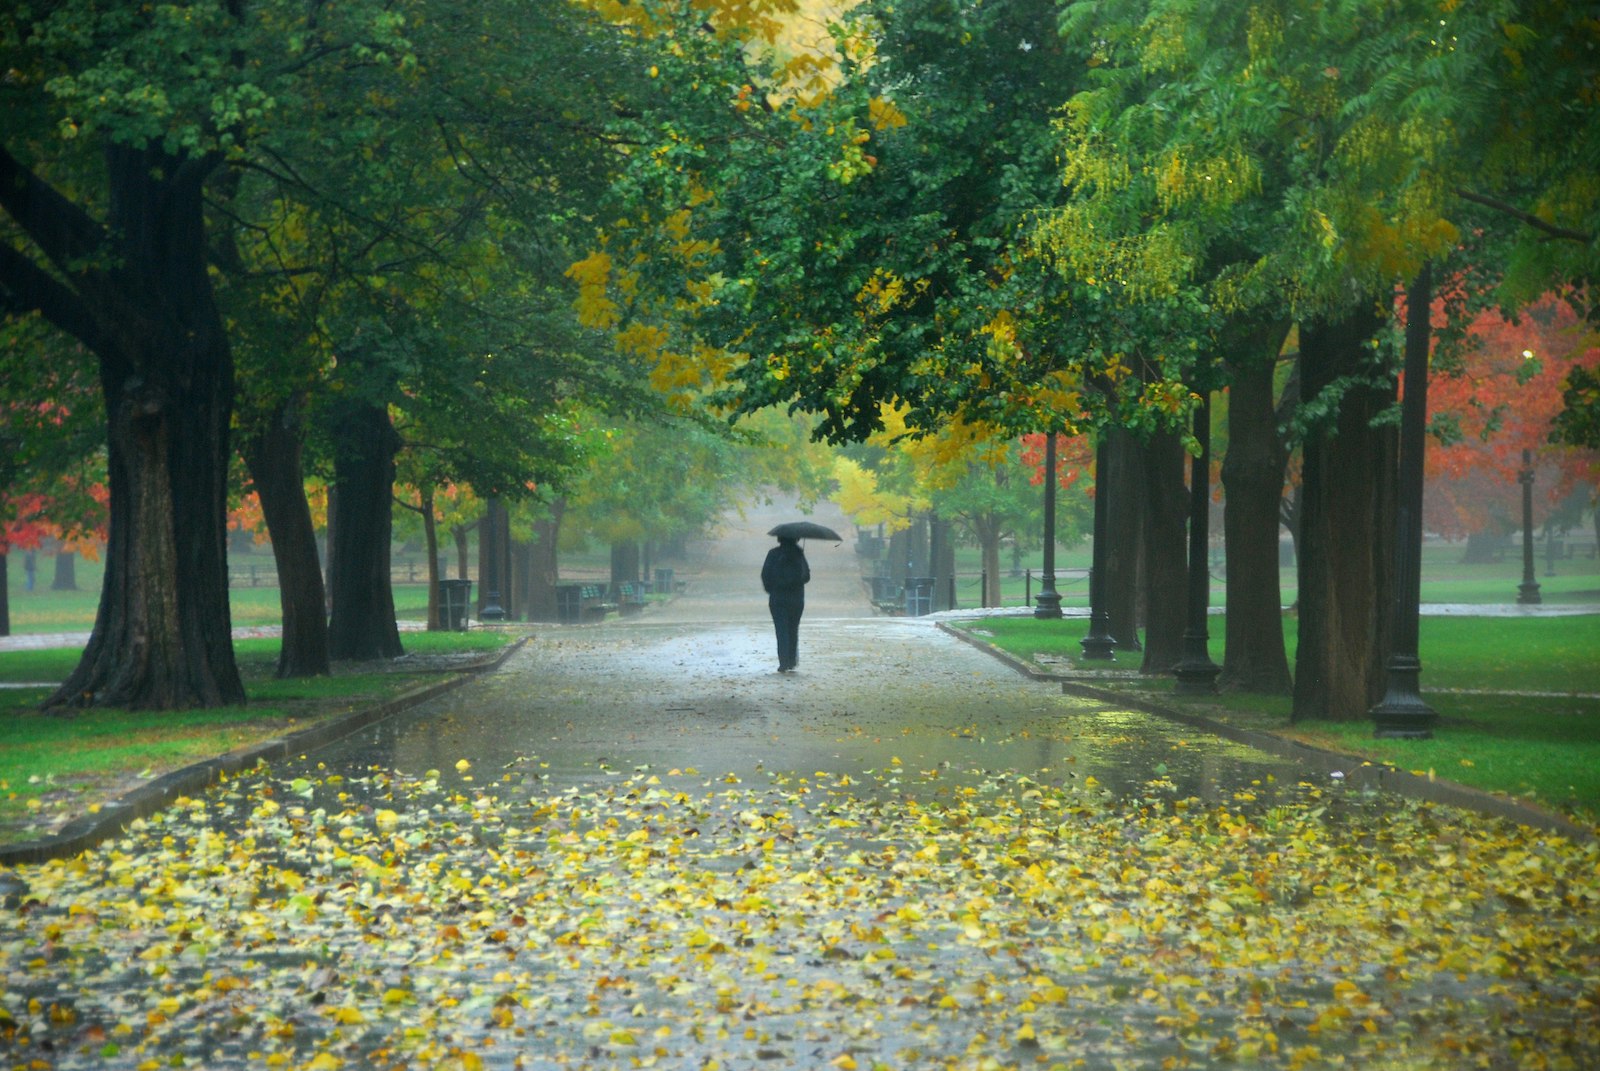 Peaceful scene showing single dark figure with umbrella on a path, framed by trees and fallen leaves. Shot taken in the rain on Boston Common with the trees in autumn colors.